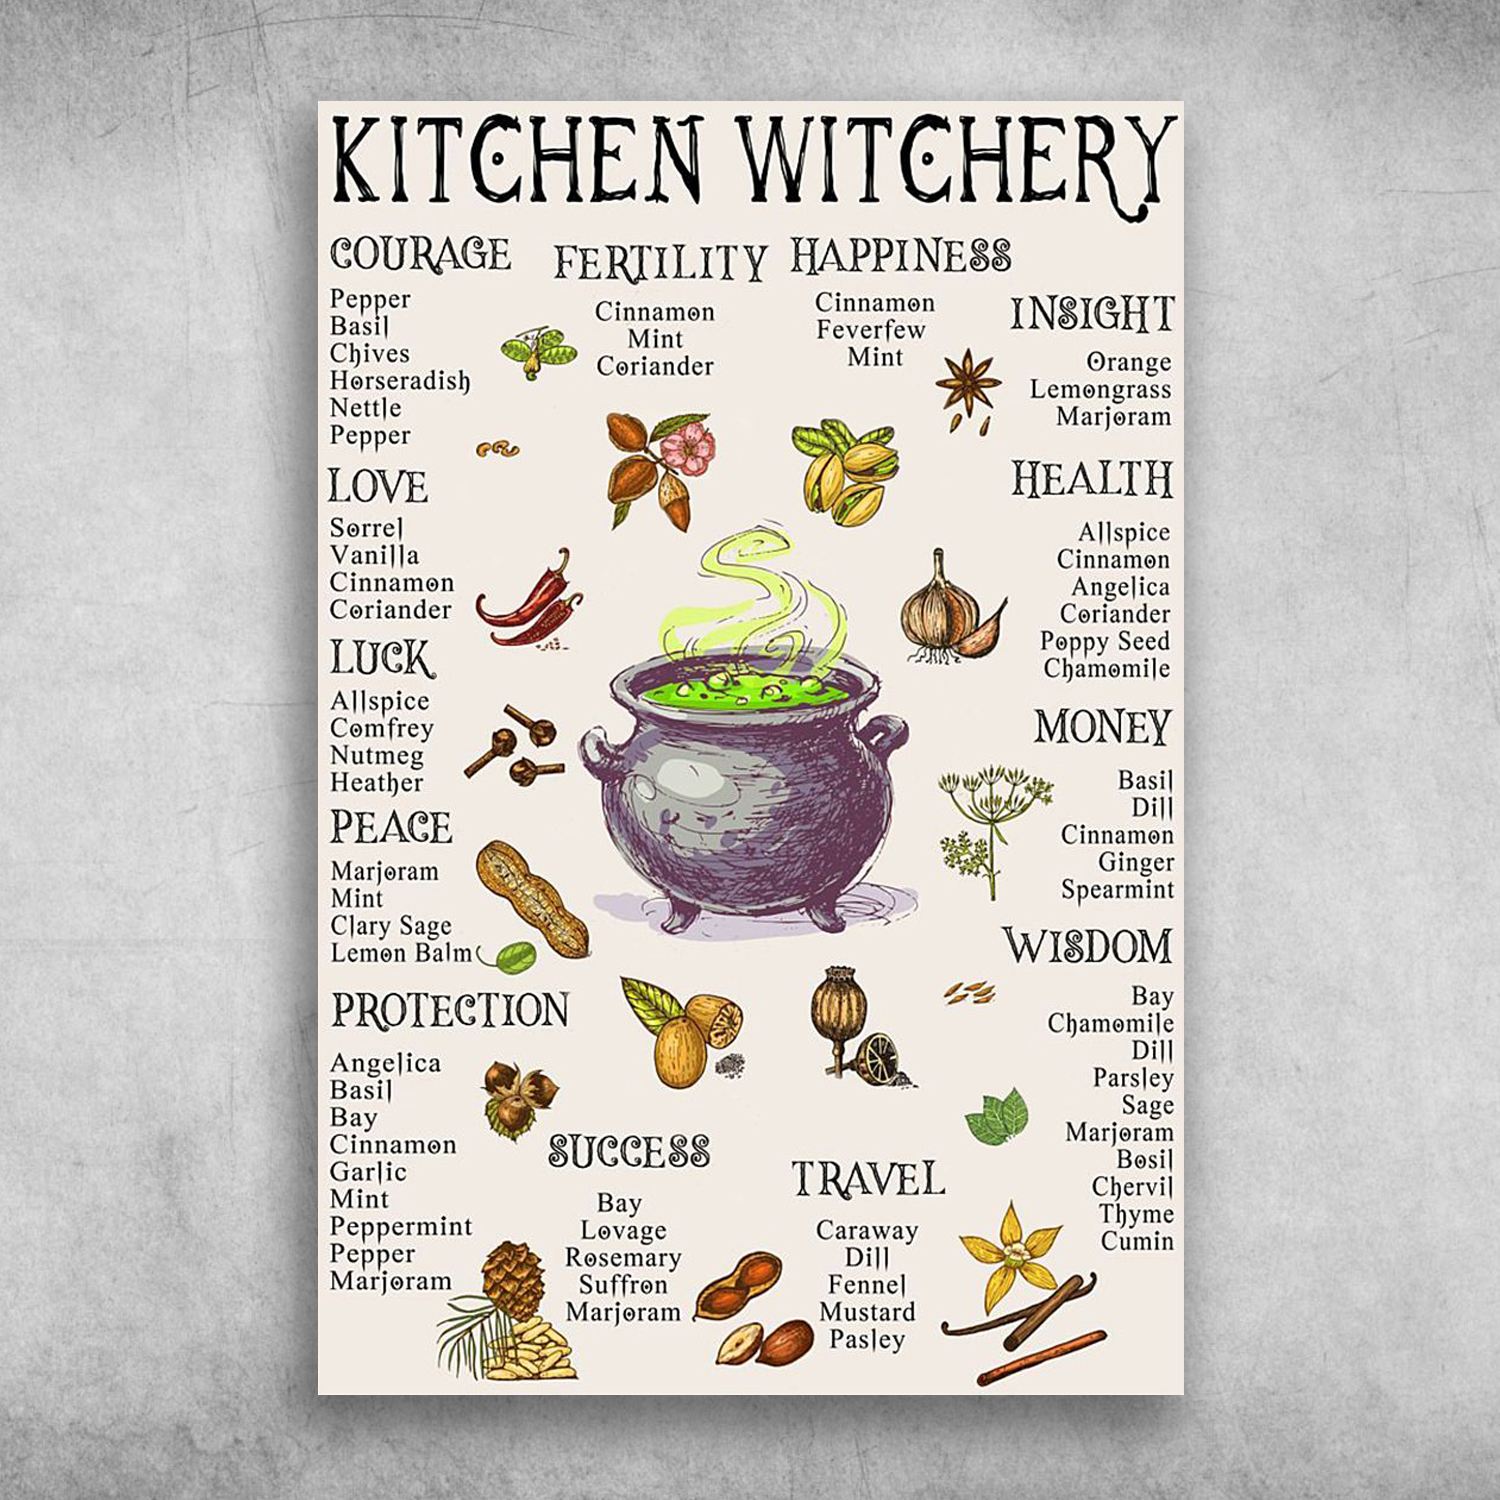 Kitchen Witchery Courage Fertility Happiness Insight